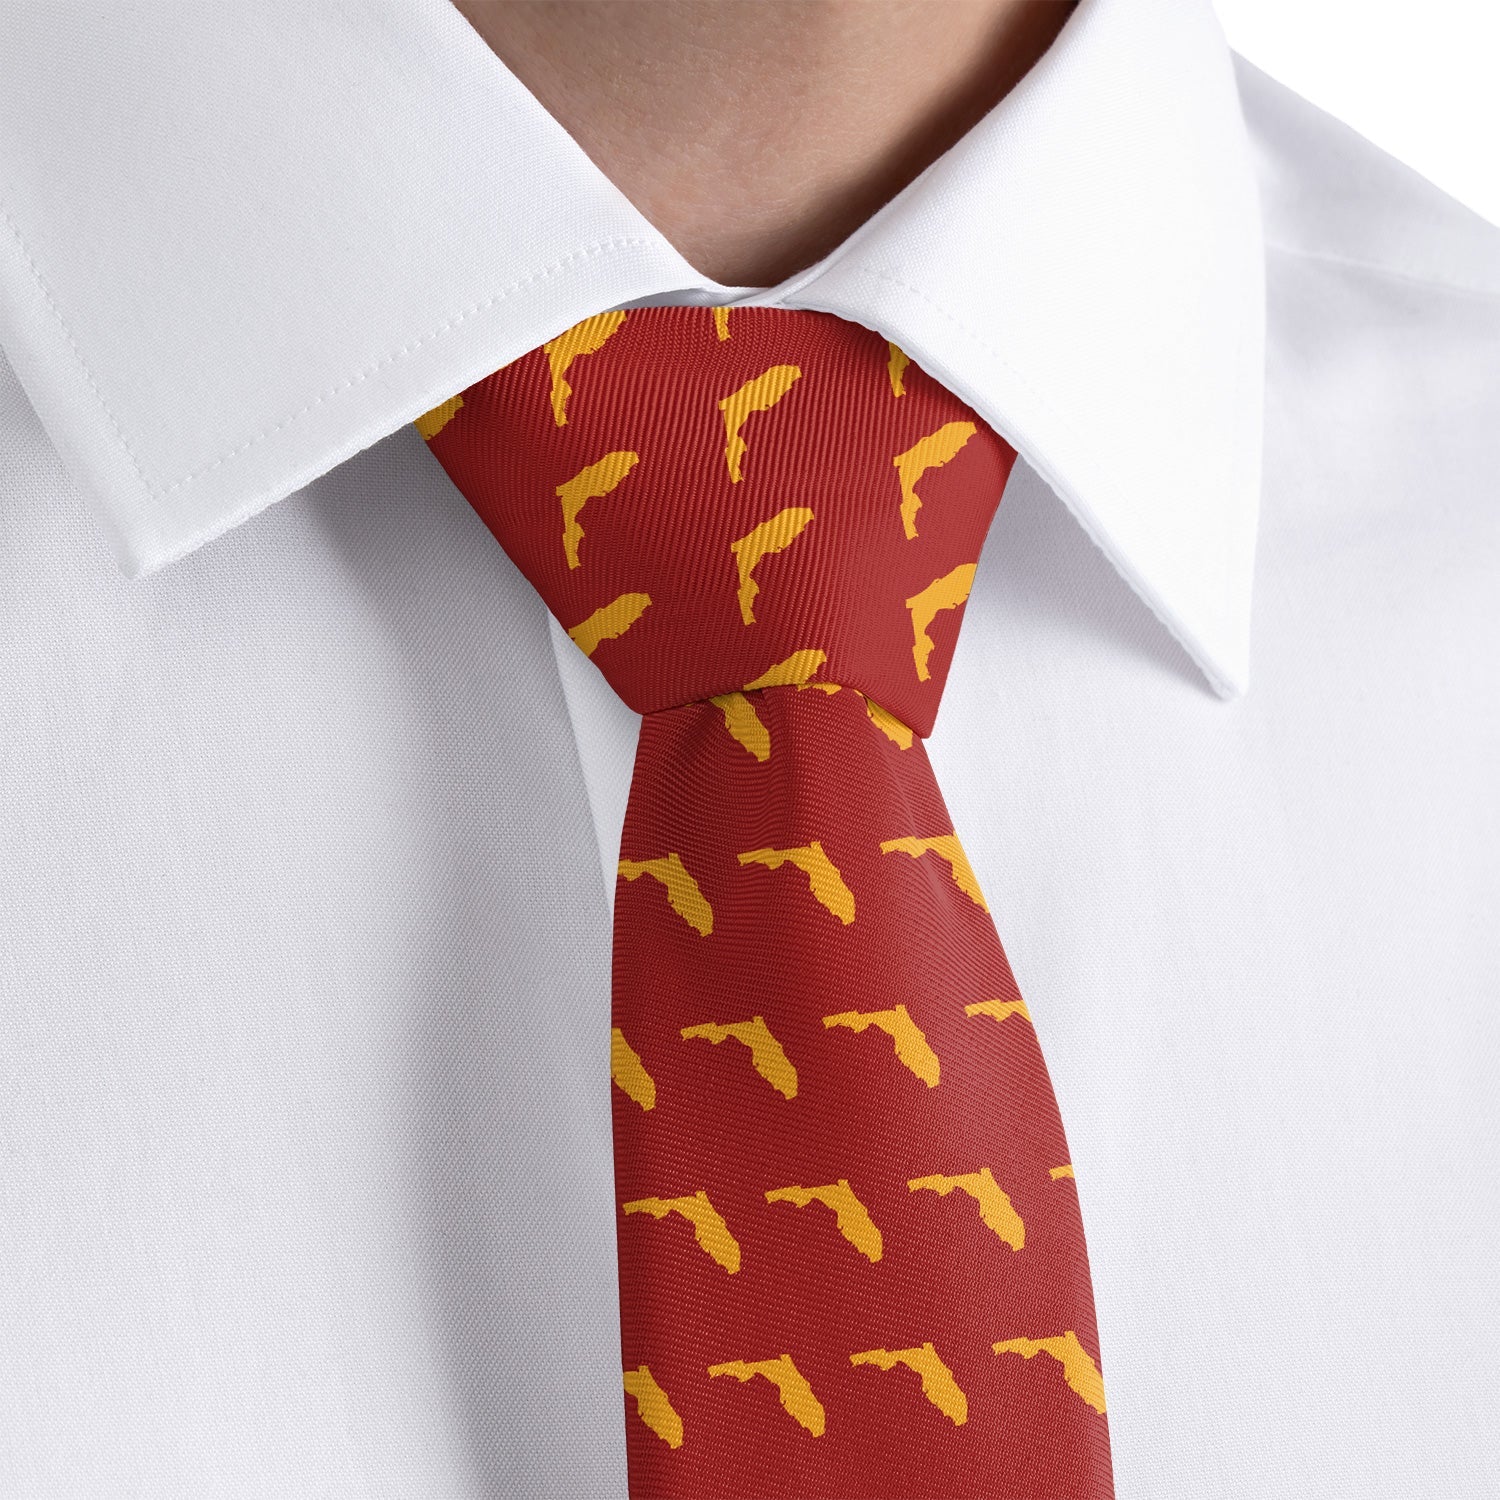 Florida State Outline Necktie - Rolled - Knotty Tie Co.